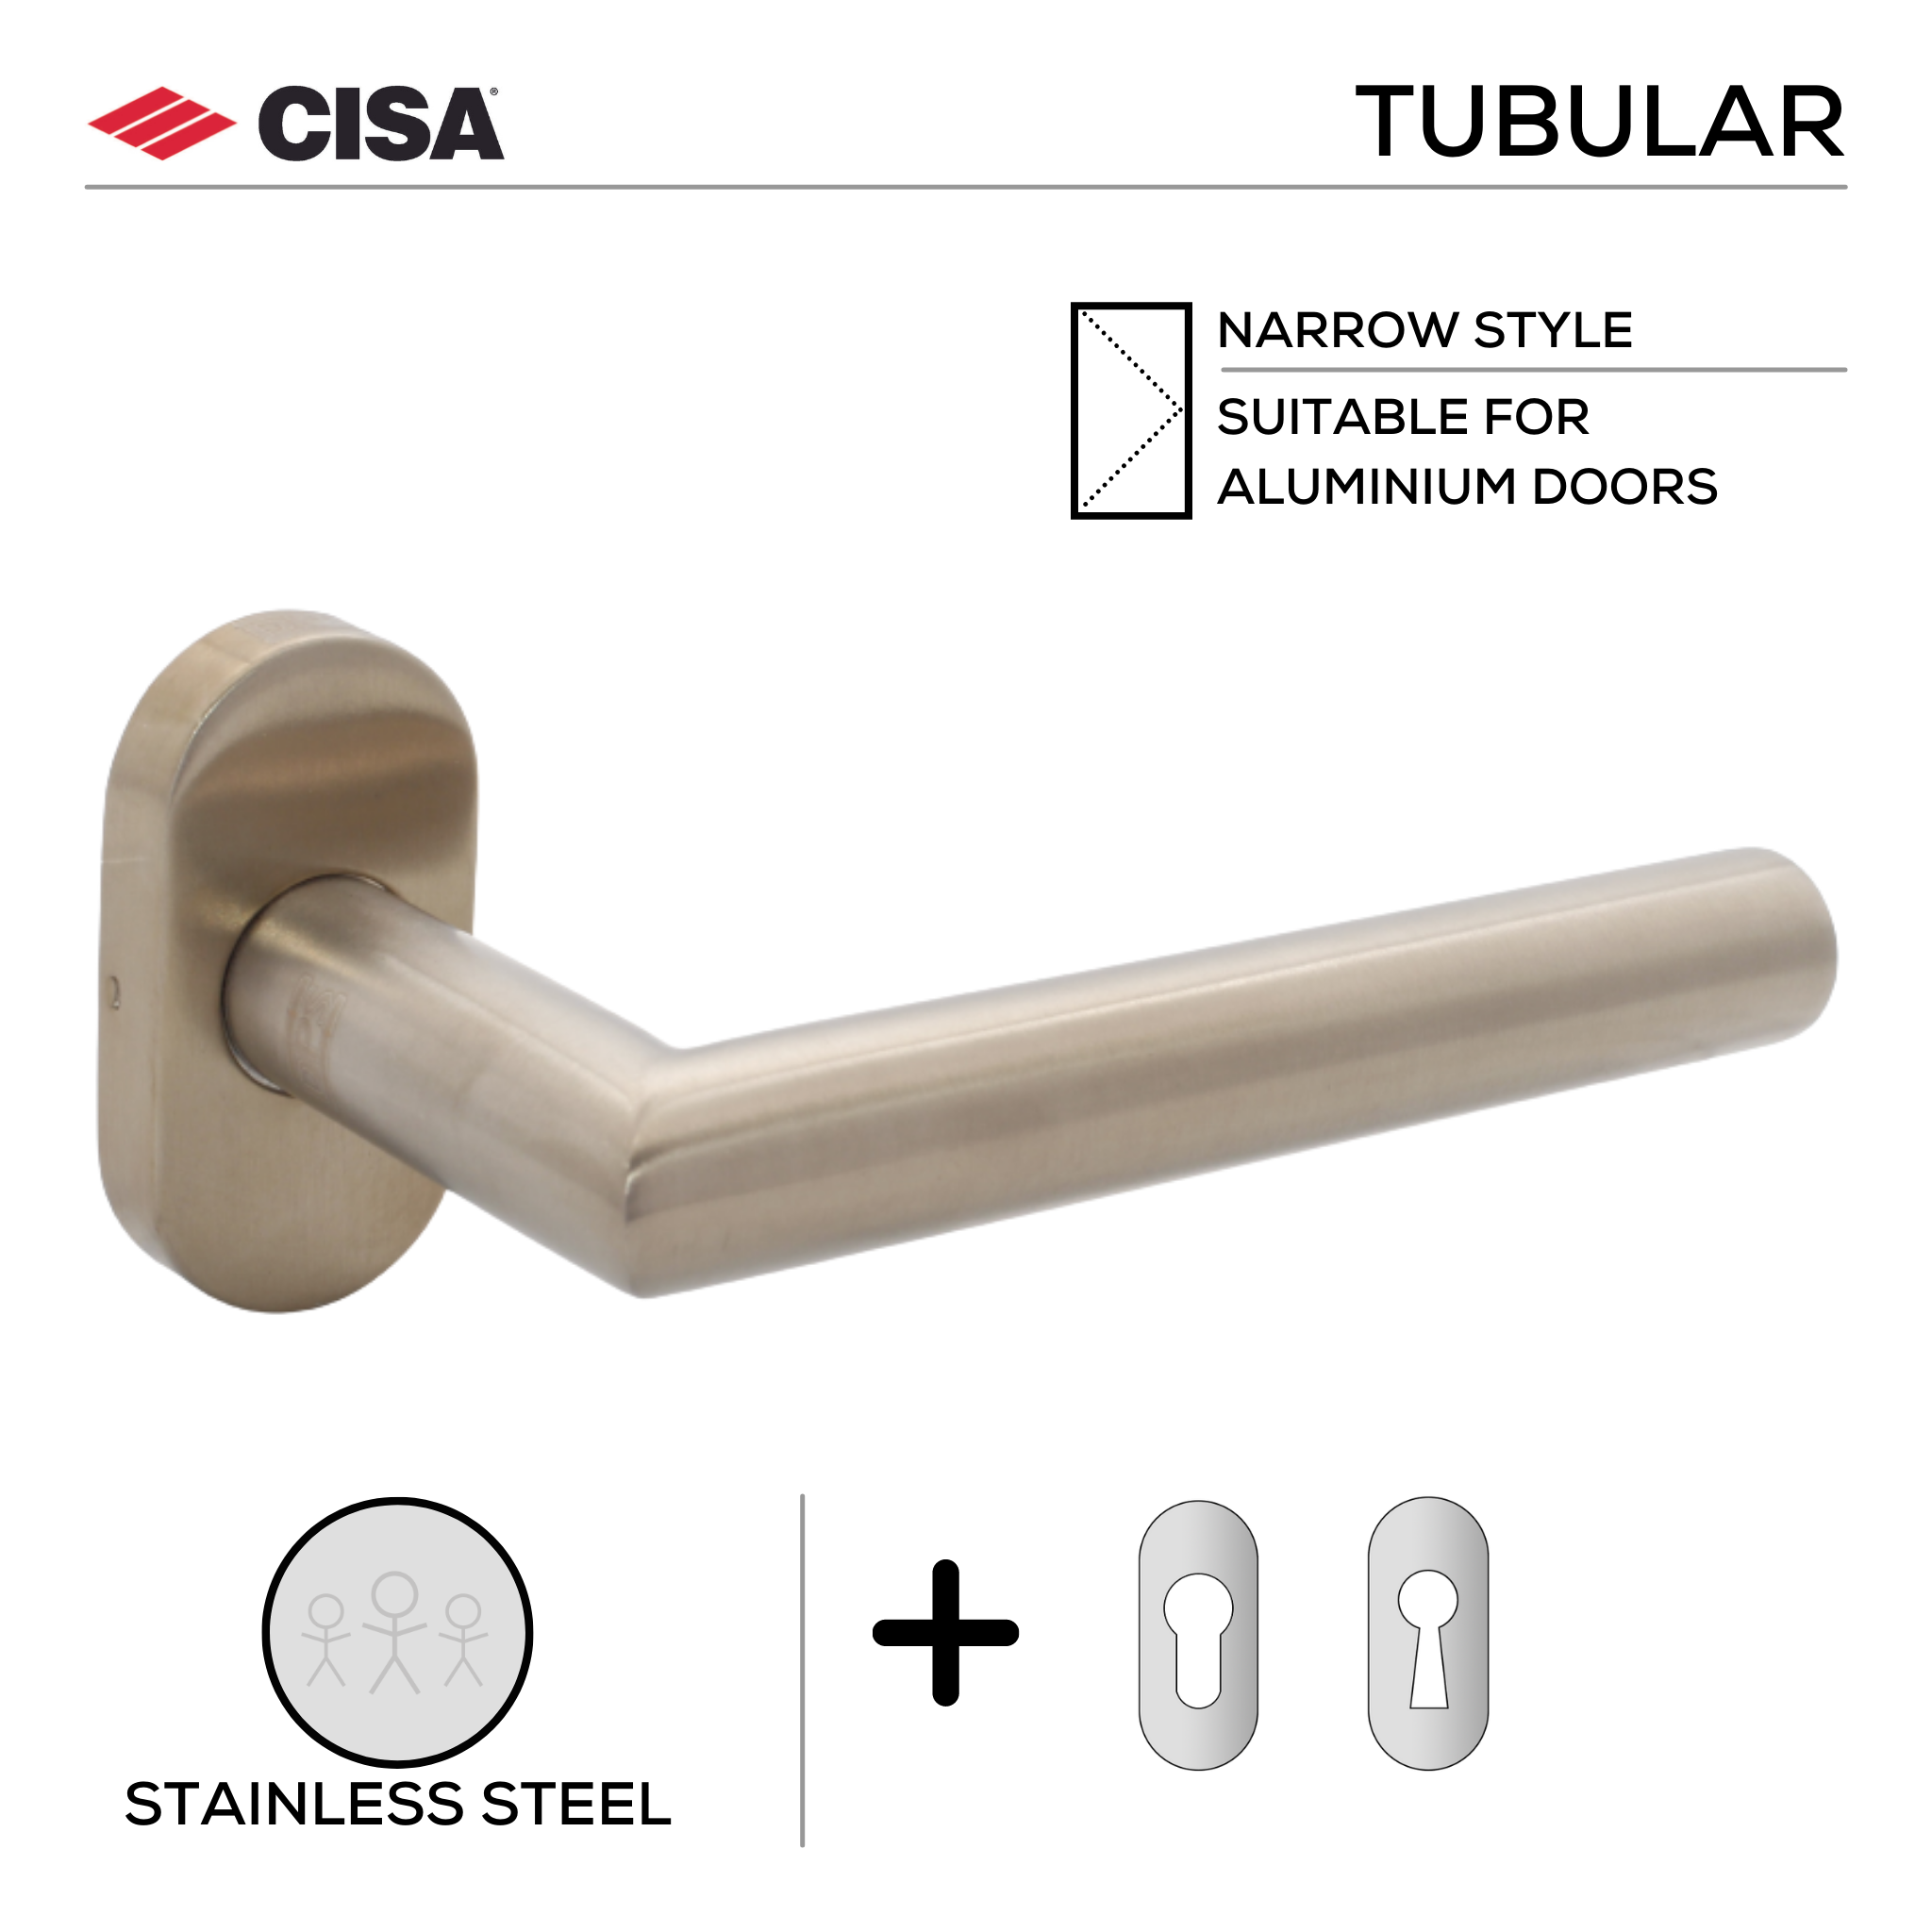 FT02.O.C.SS, Lever Handles, Tubular, On Oval Rose, With Cylinder Escutcheons, 134mm (l), Stainless Steel, CISA